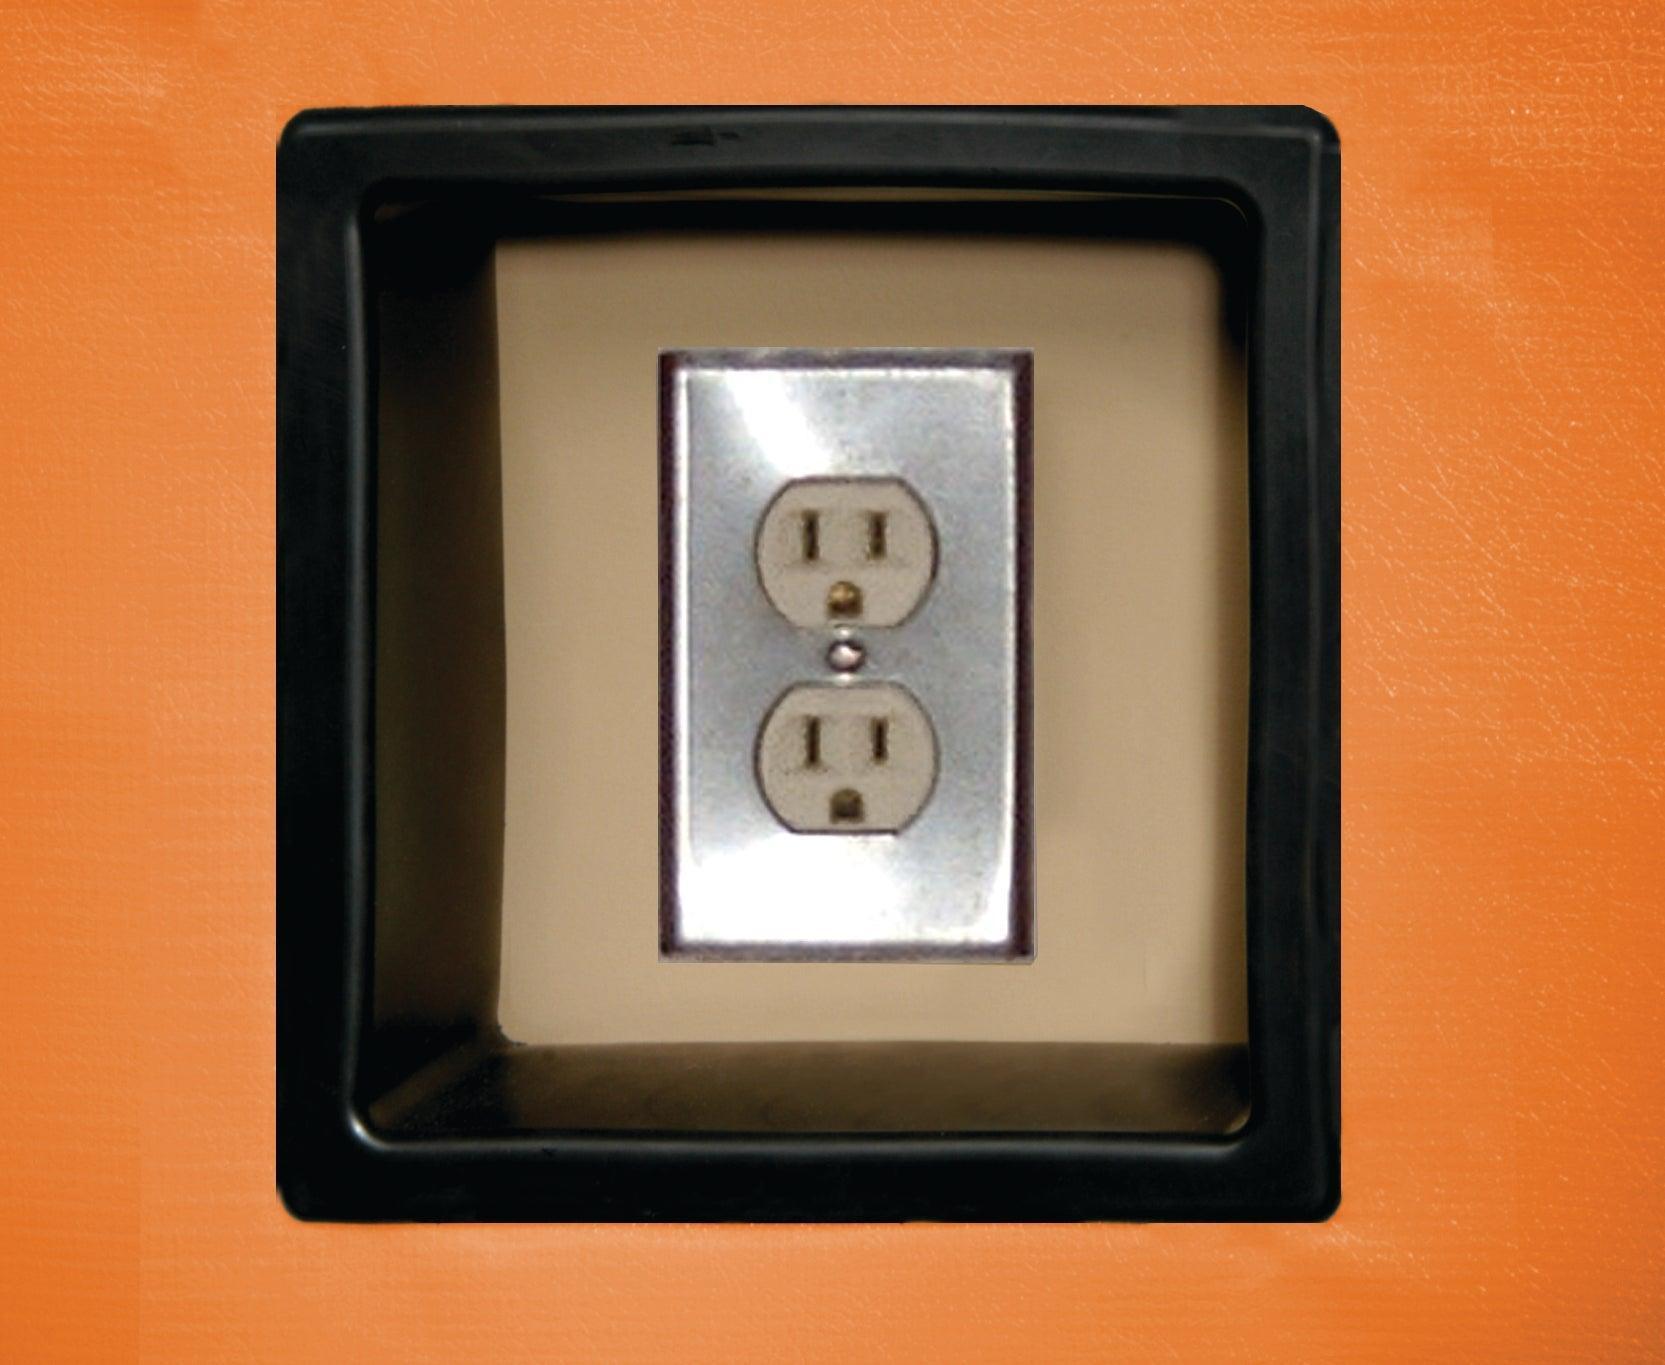 Factory Installed Outlet Cutout - bisoninc